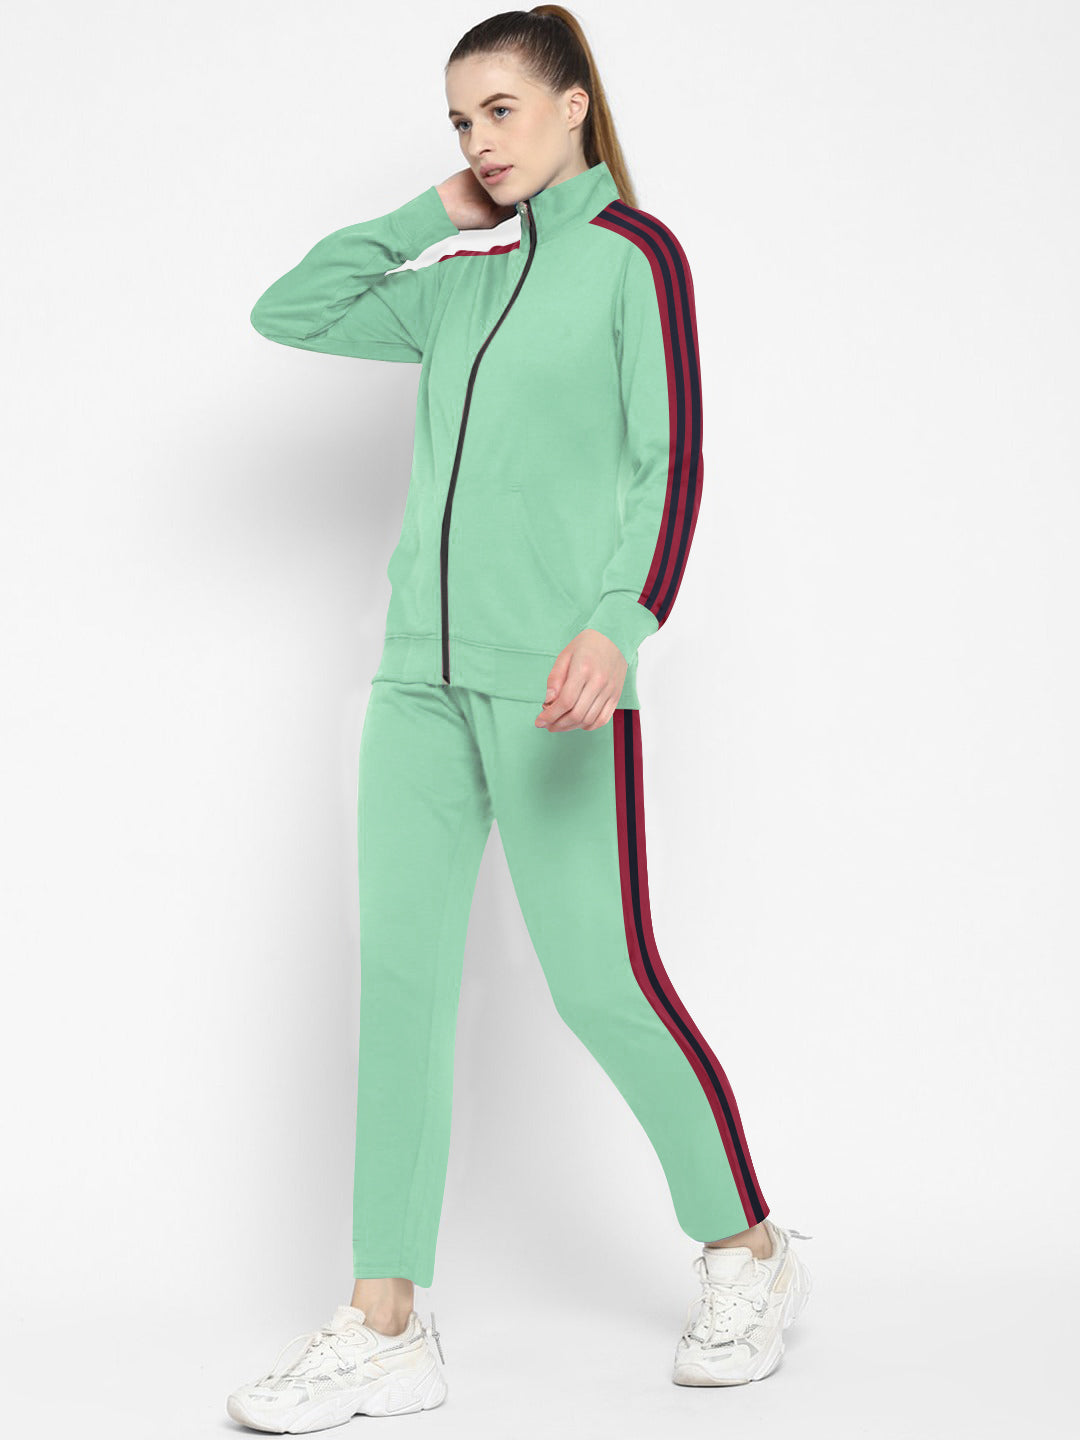 Louis Vicaci Fleece Zipper Tracksuit For Ladies-Light Green with Maroon Stripe-SP246/BR366